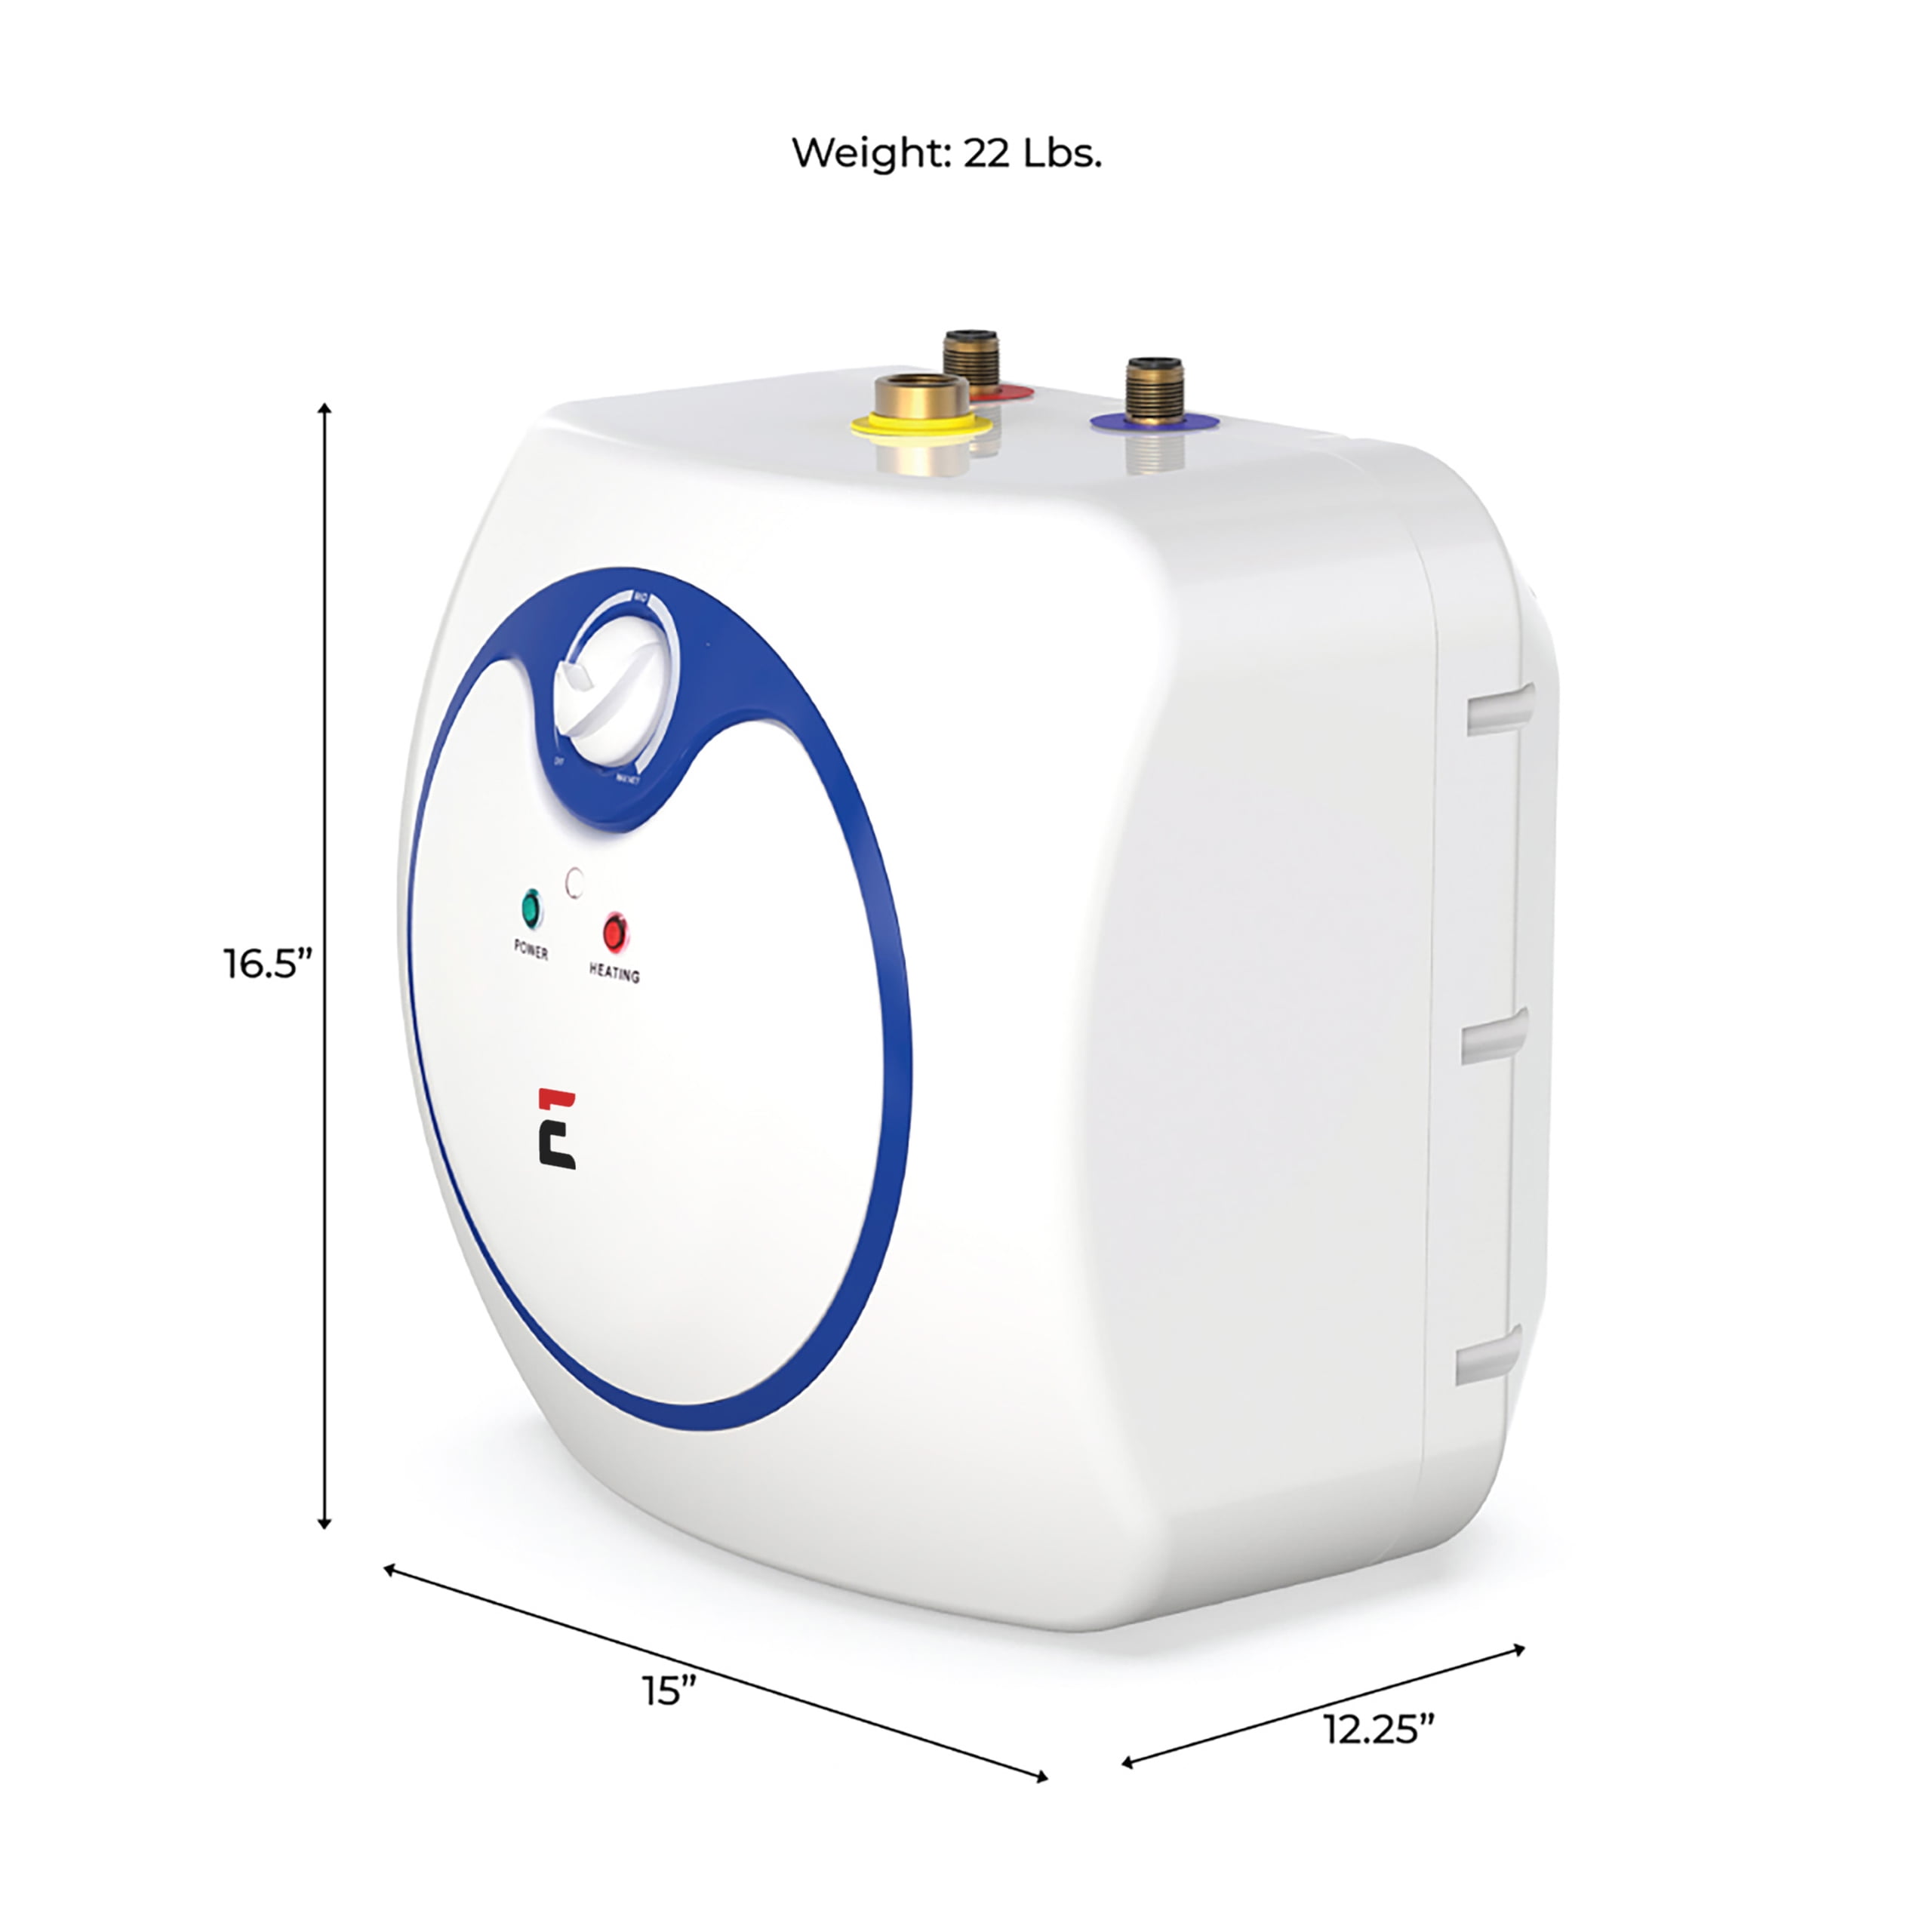 thermomate Mini Tank Electric Water Heater ES400 4 Gallons Point of Use  Water Heater for Instant Hot Water Under Kitchen Sink 120V 1440W - Yahoo  Shopping